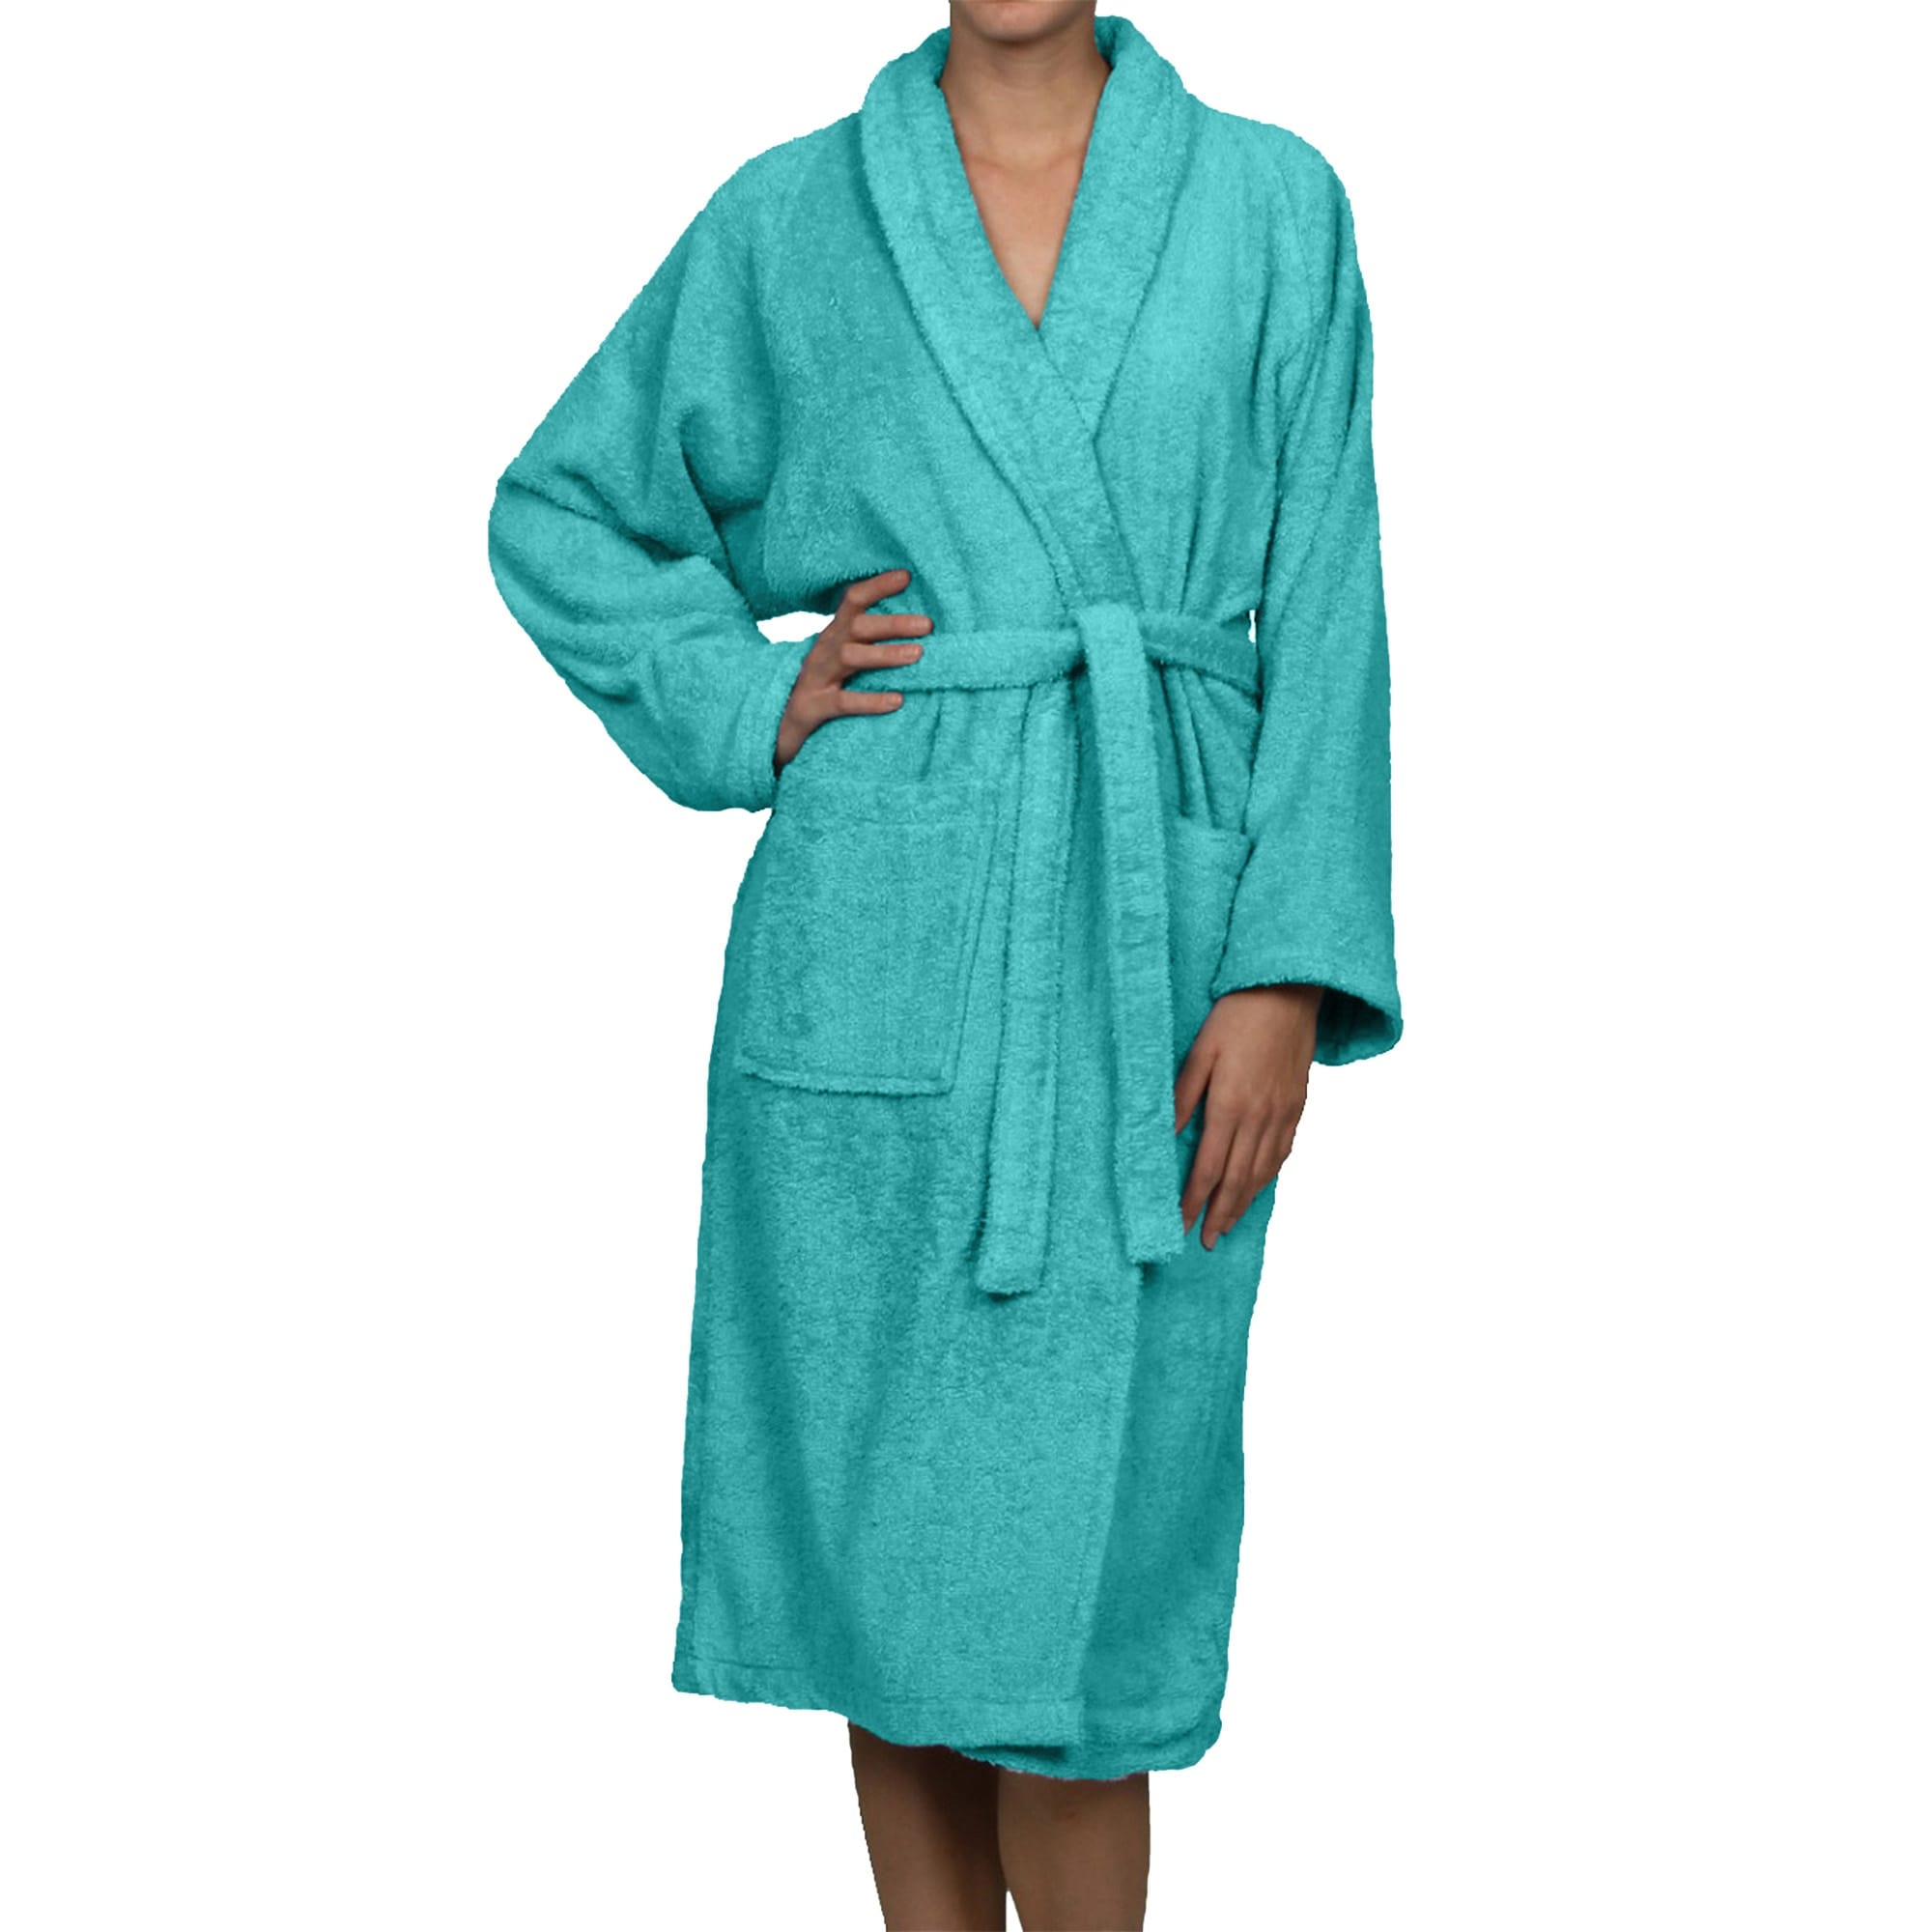 https://ak1.ostkcdn.com/images/products/is/images/direct/2bbed21a8878e65034dedec3f16c65ae9ca9b1ba/100%25-Cotton-Soft-Terry-Adult-Unisex-Lightweight-Bathrobe-by-Superior.jpg